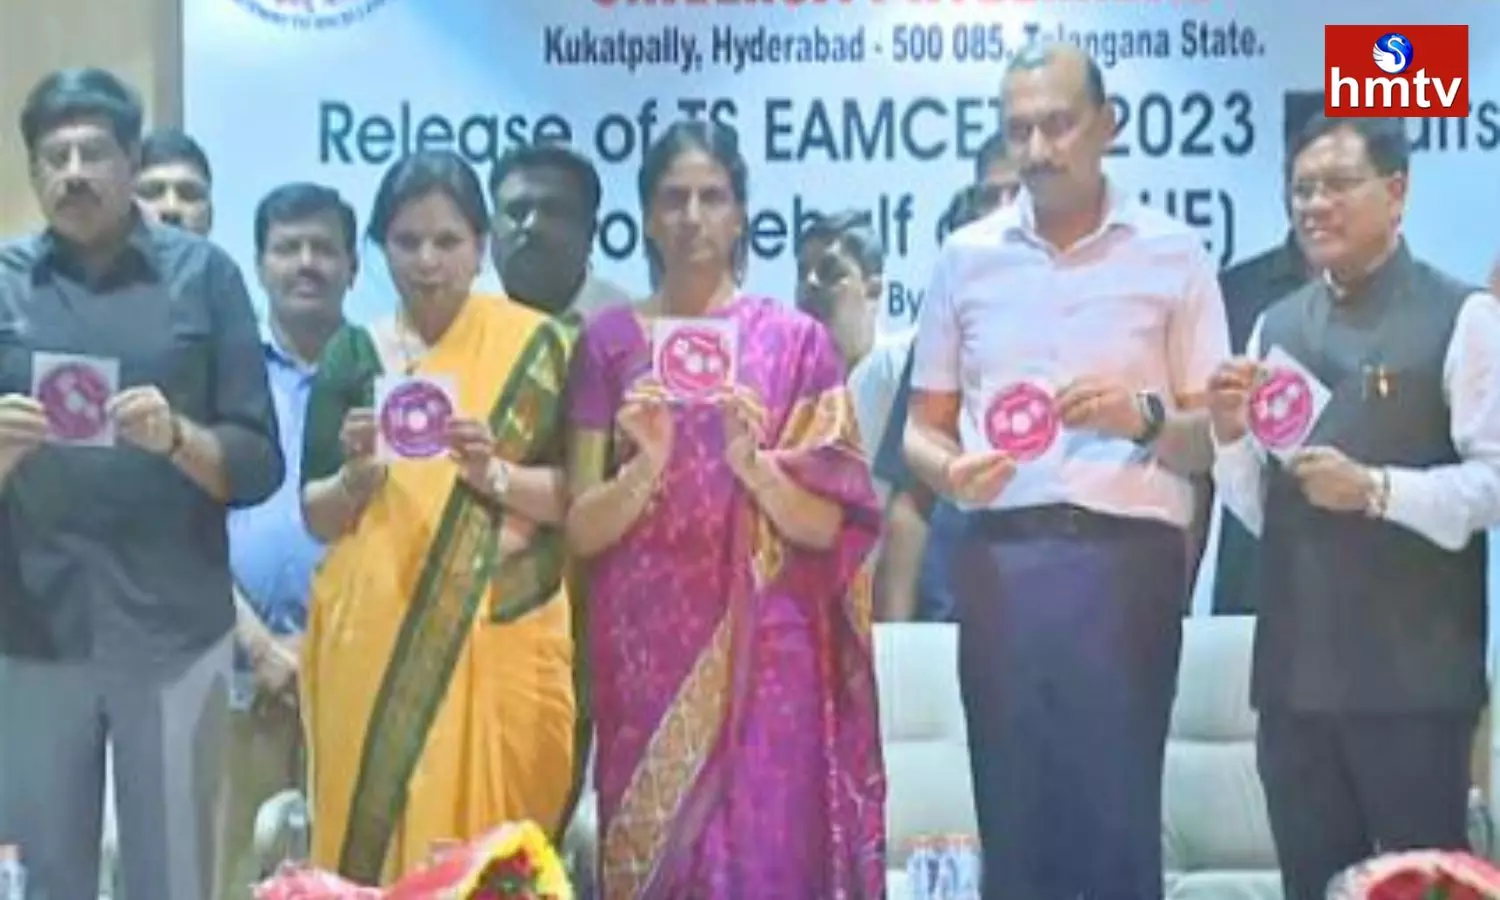 Minister Sabitha Released TS EAMCET Results